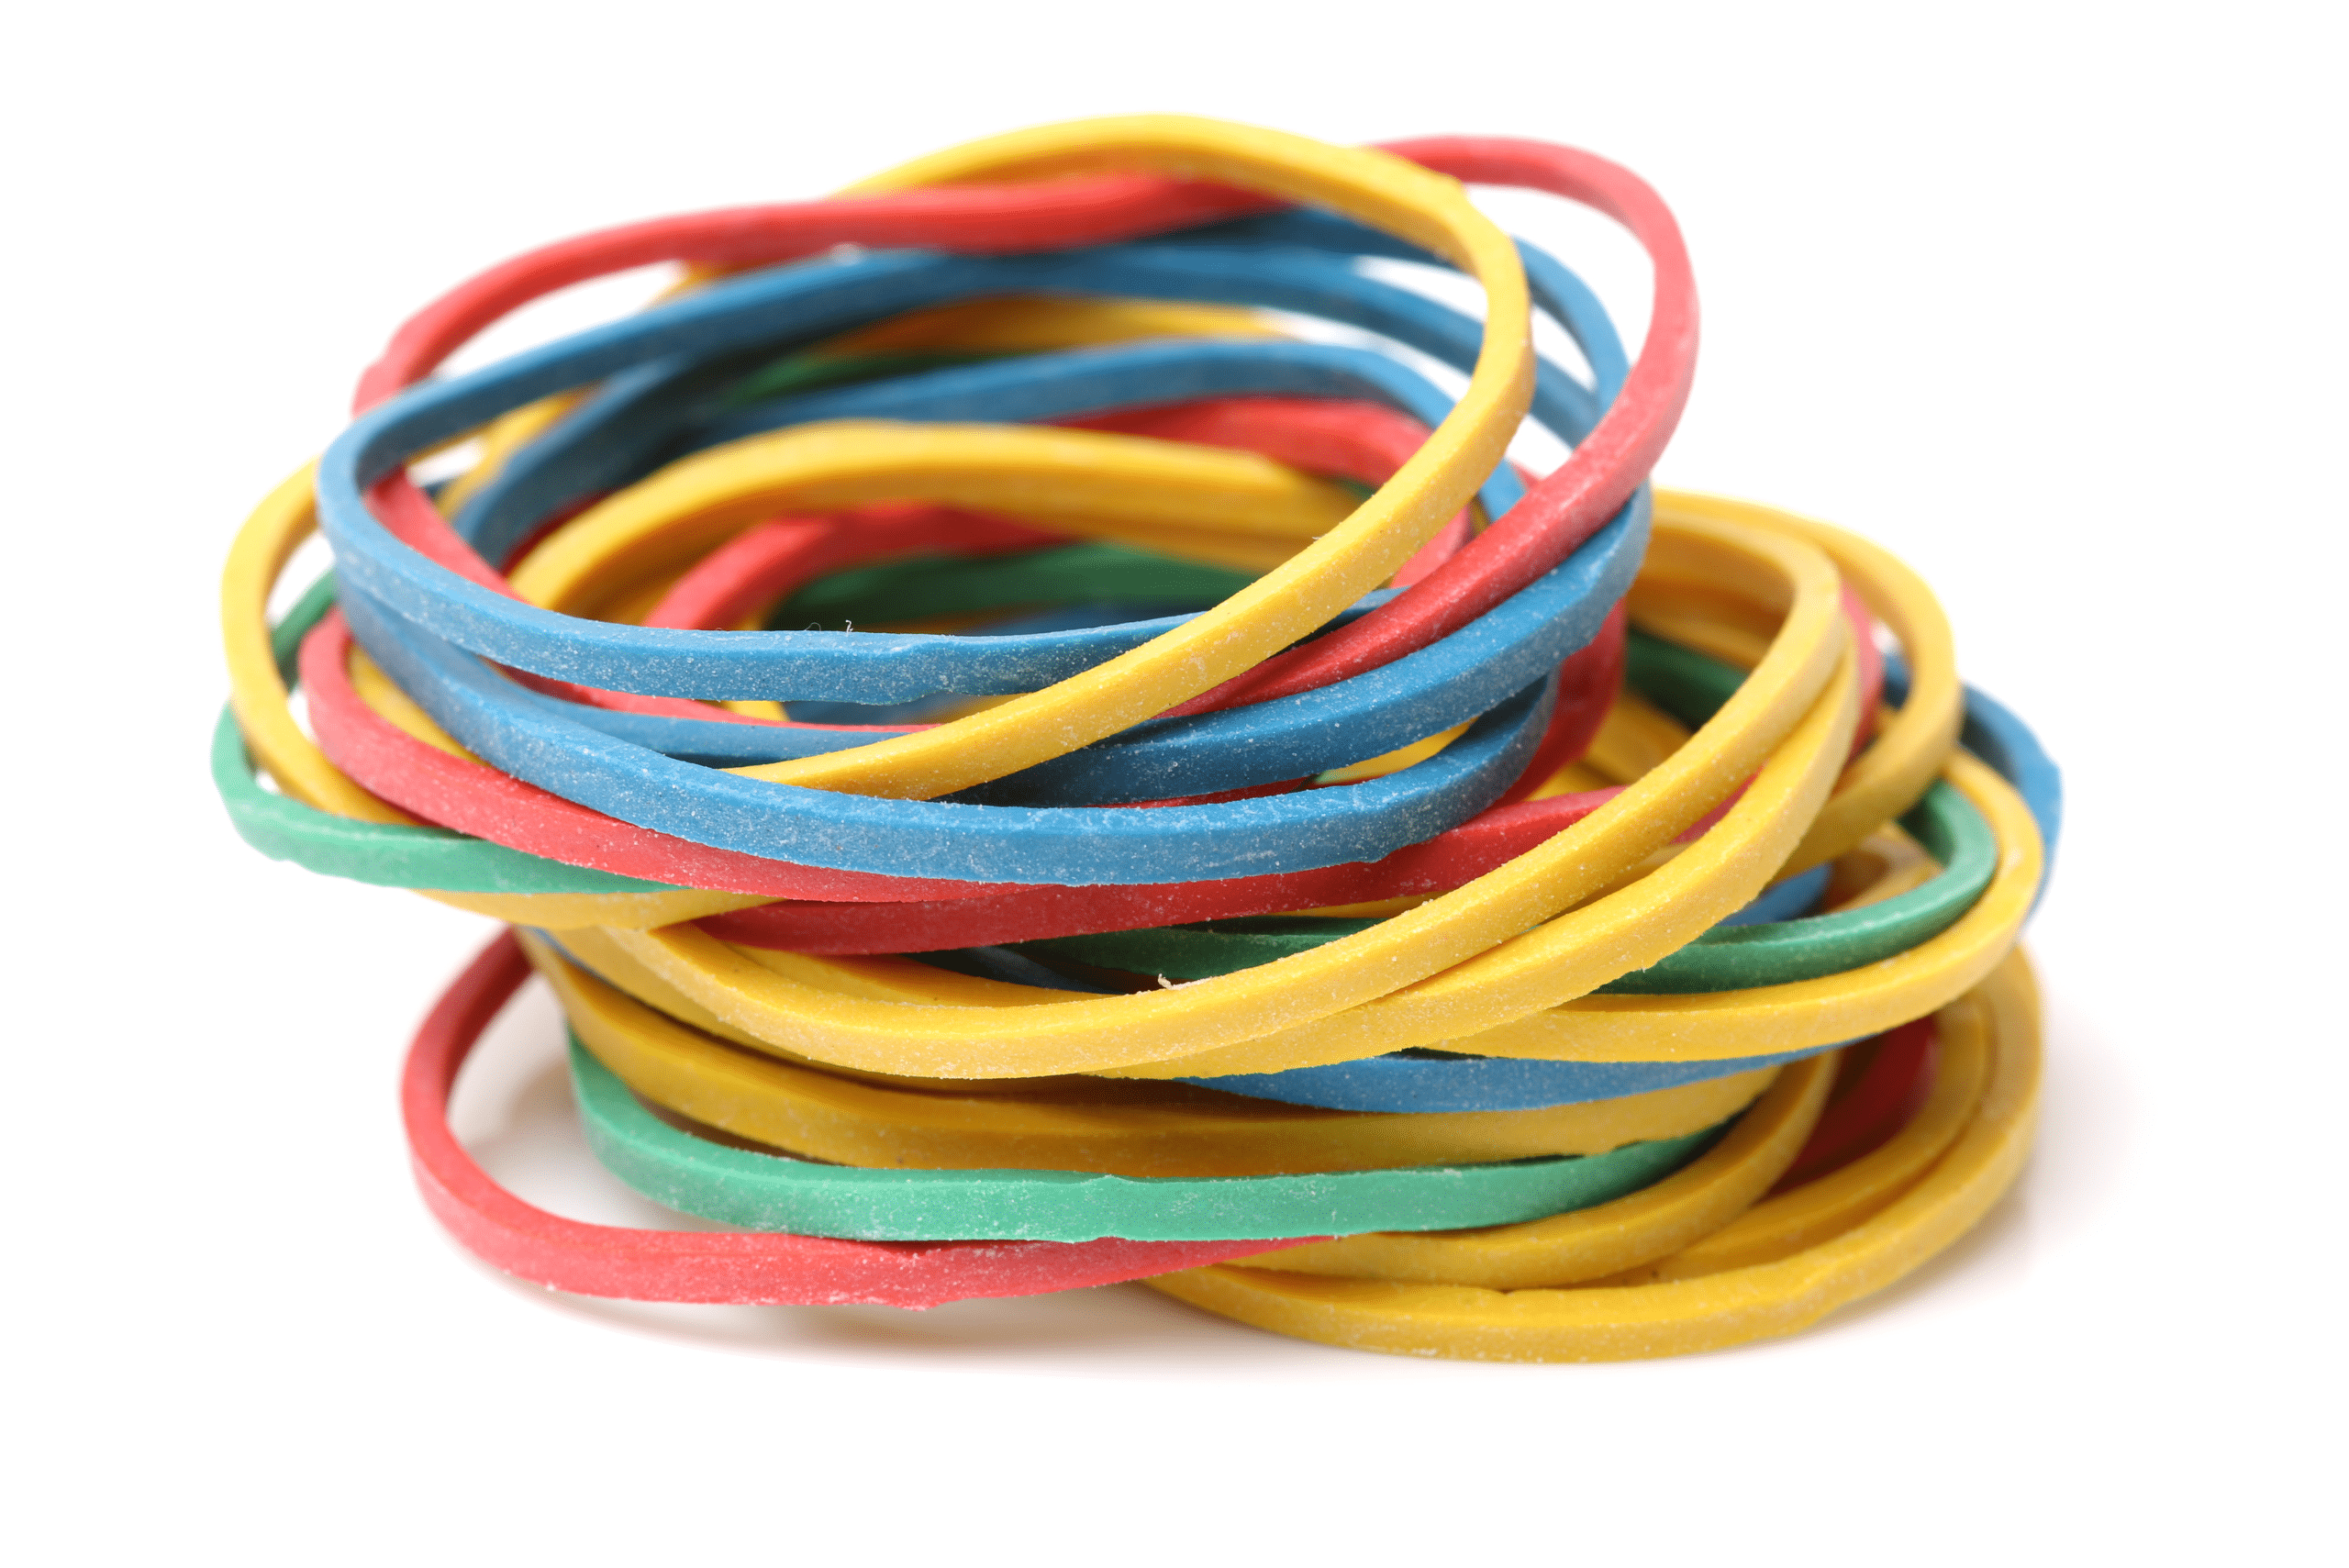 An assortment of rubber bands in various colors.